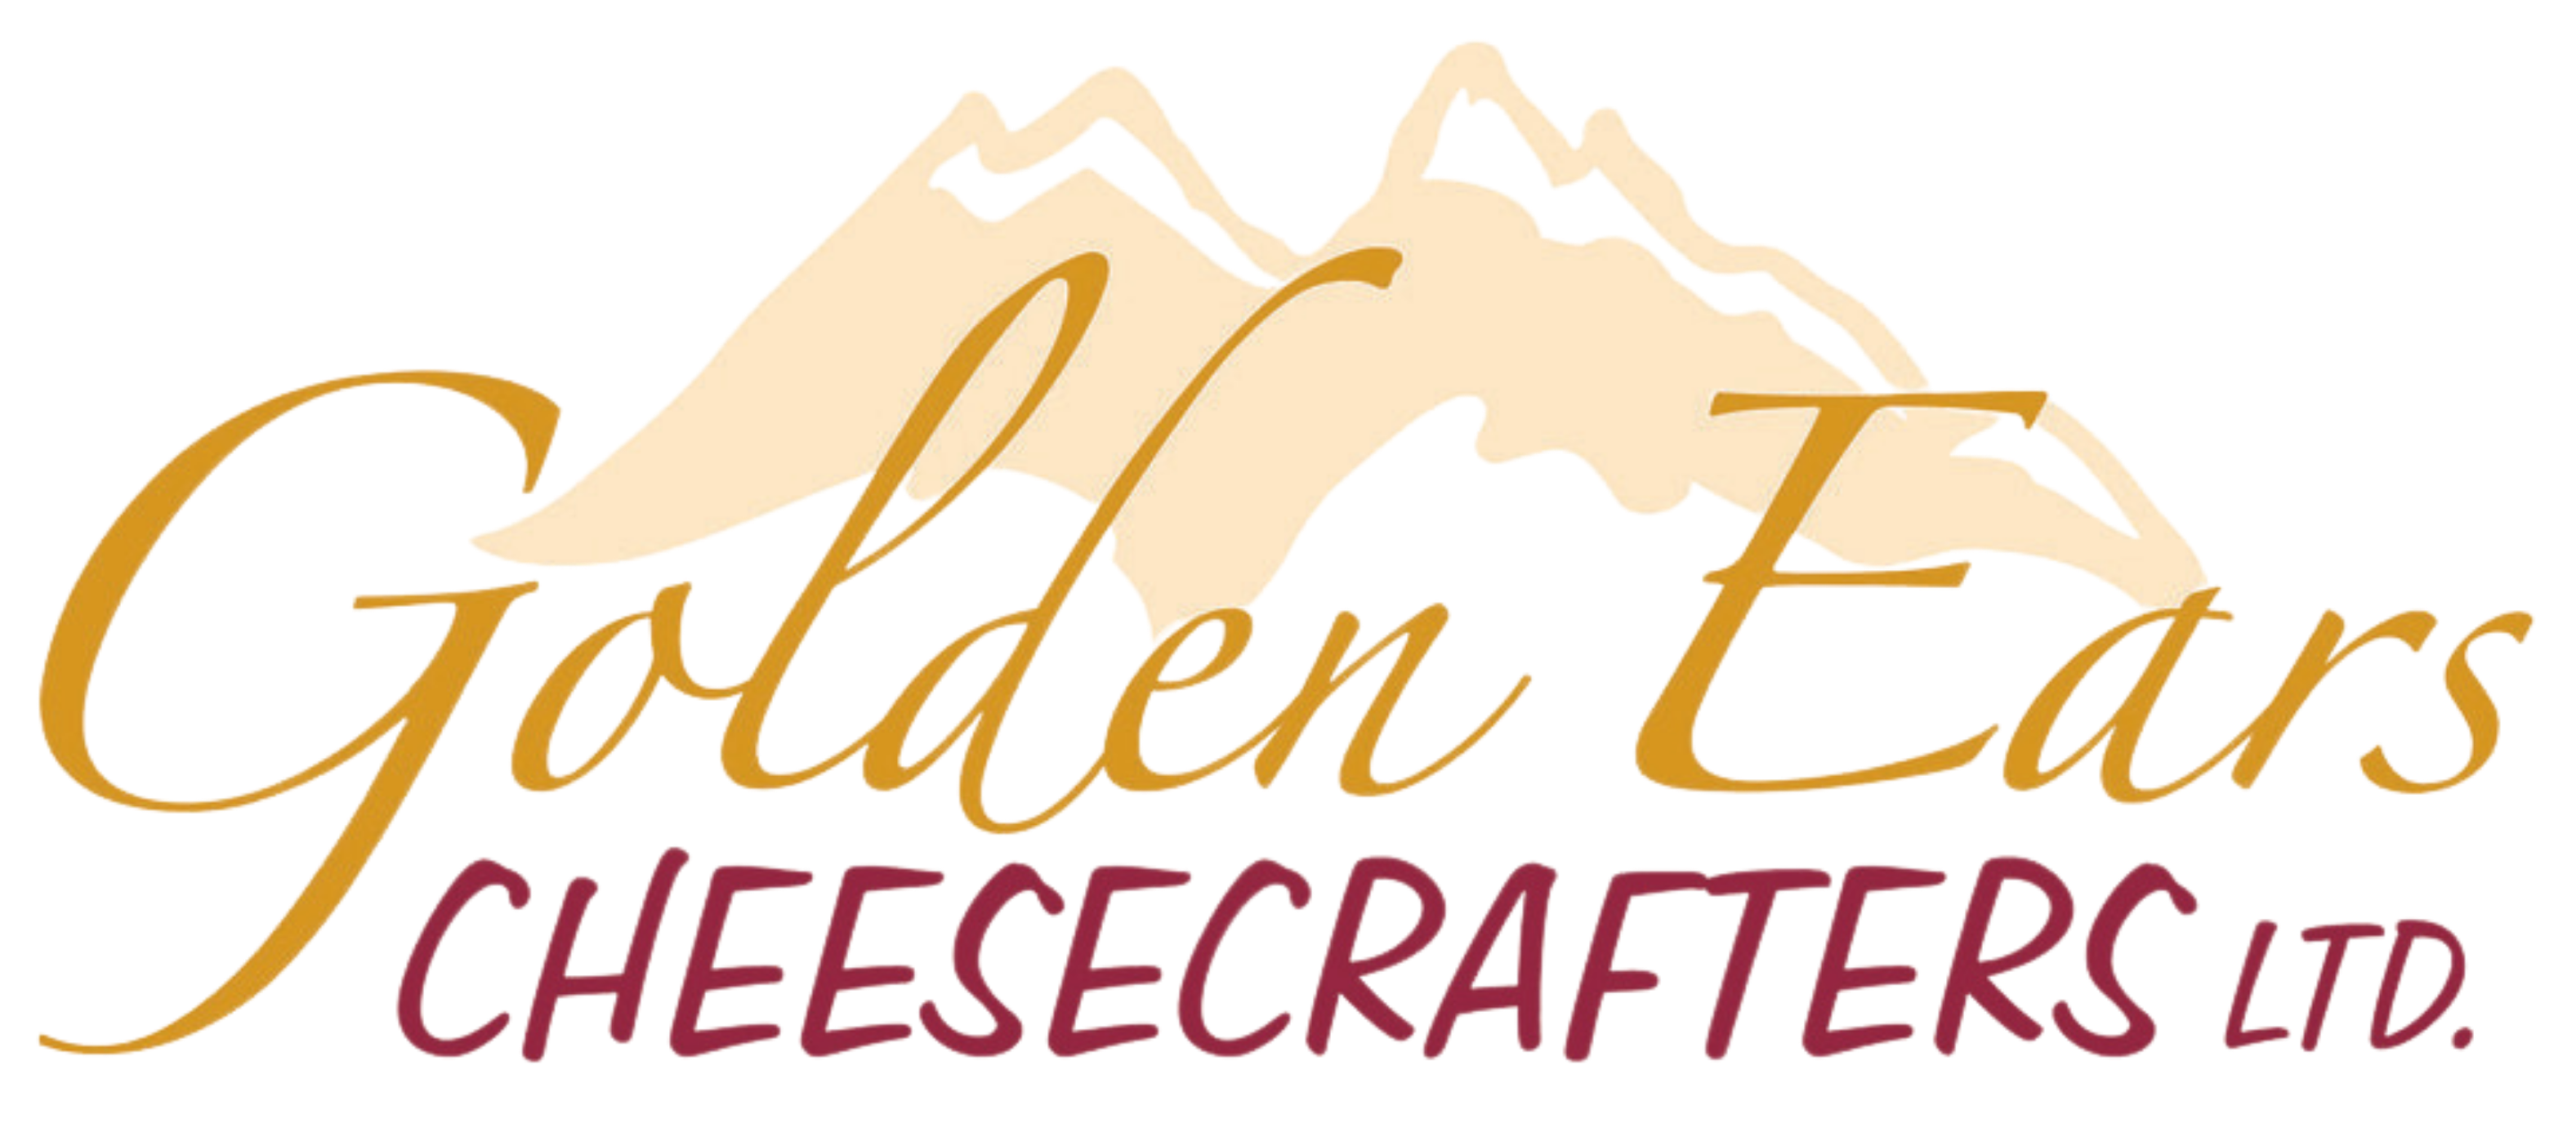 Golden Ears Cheesecrafters Logo